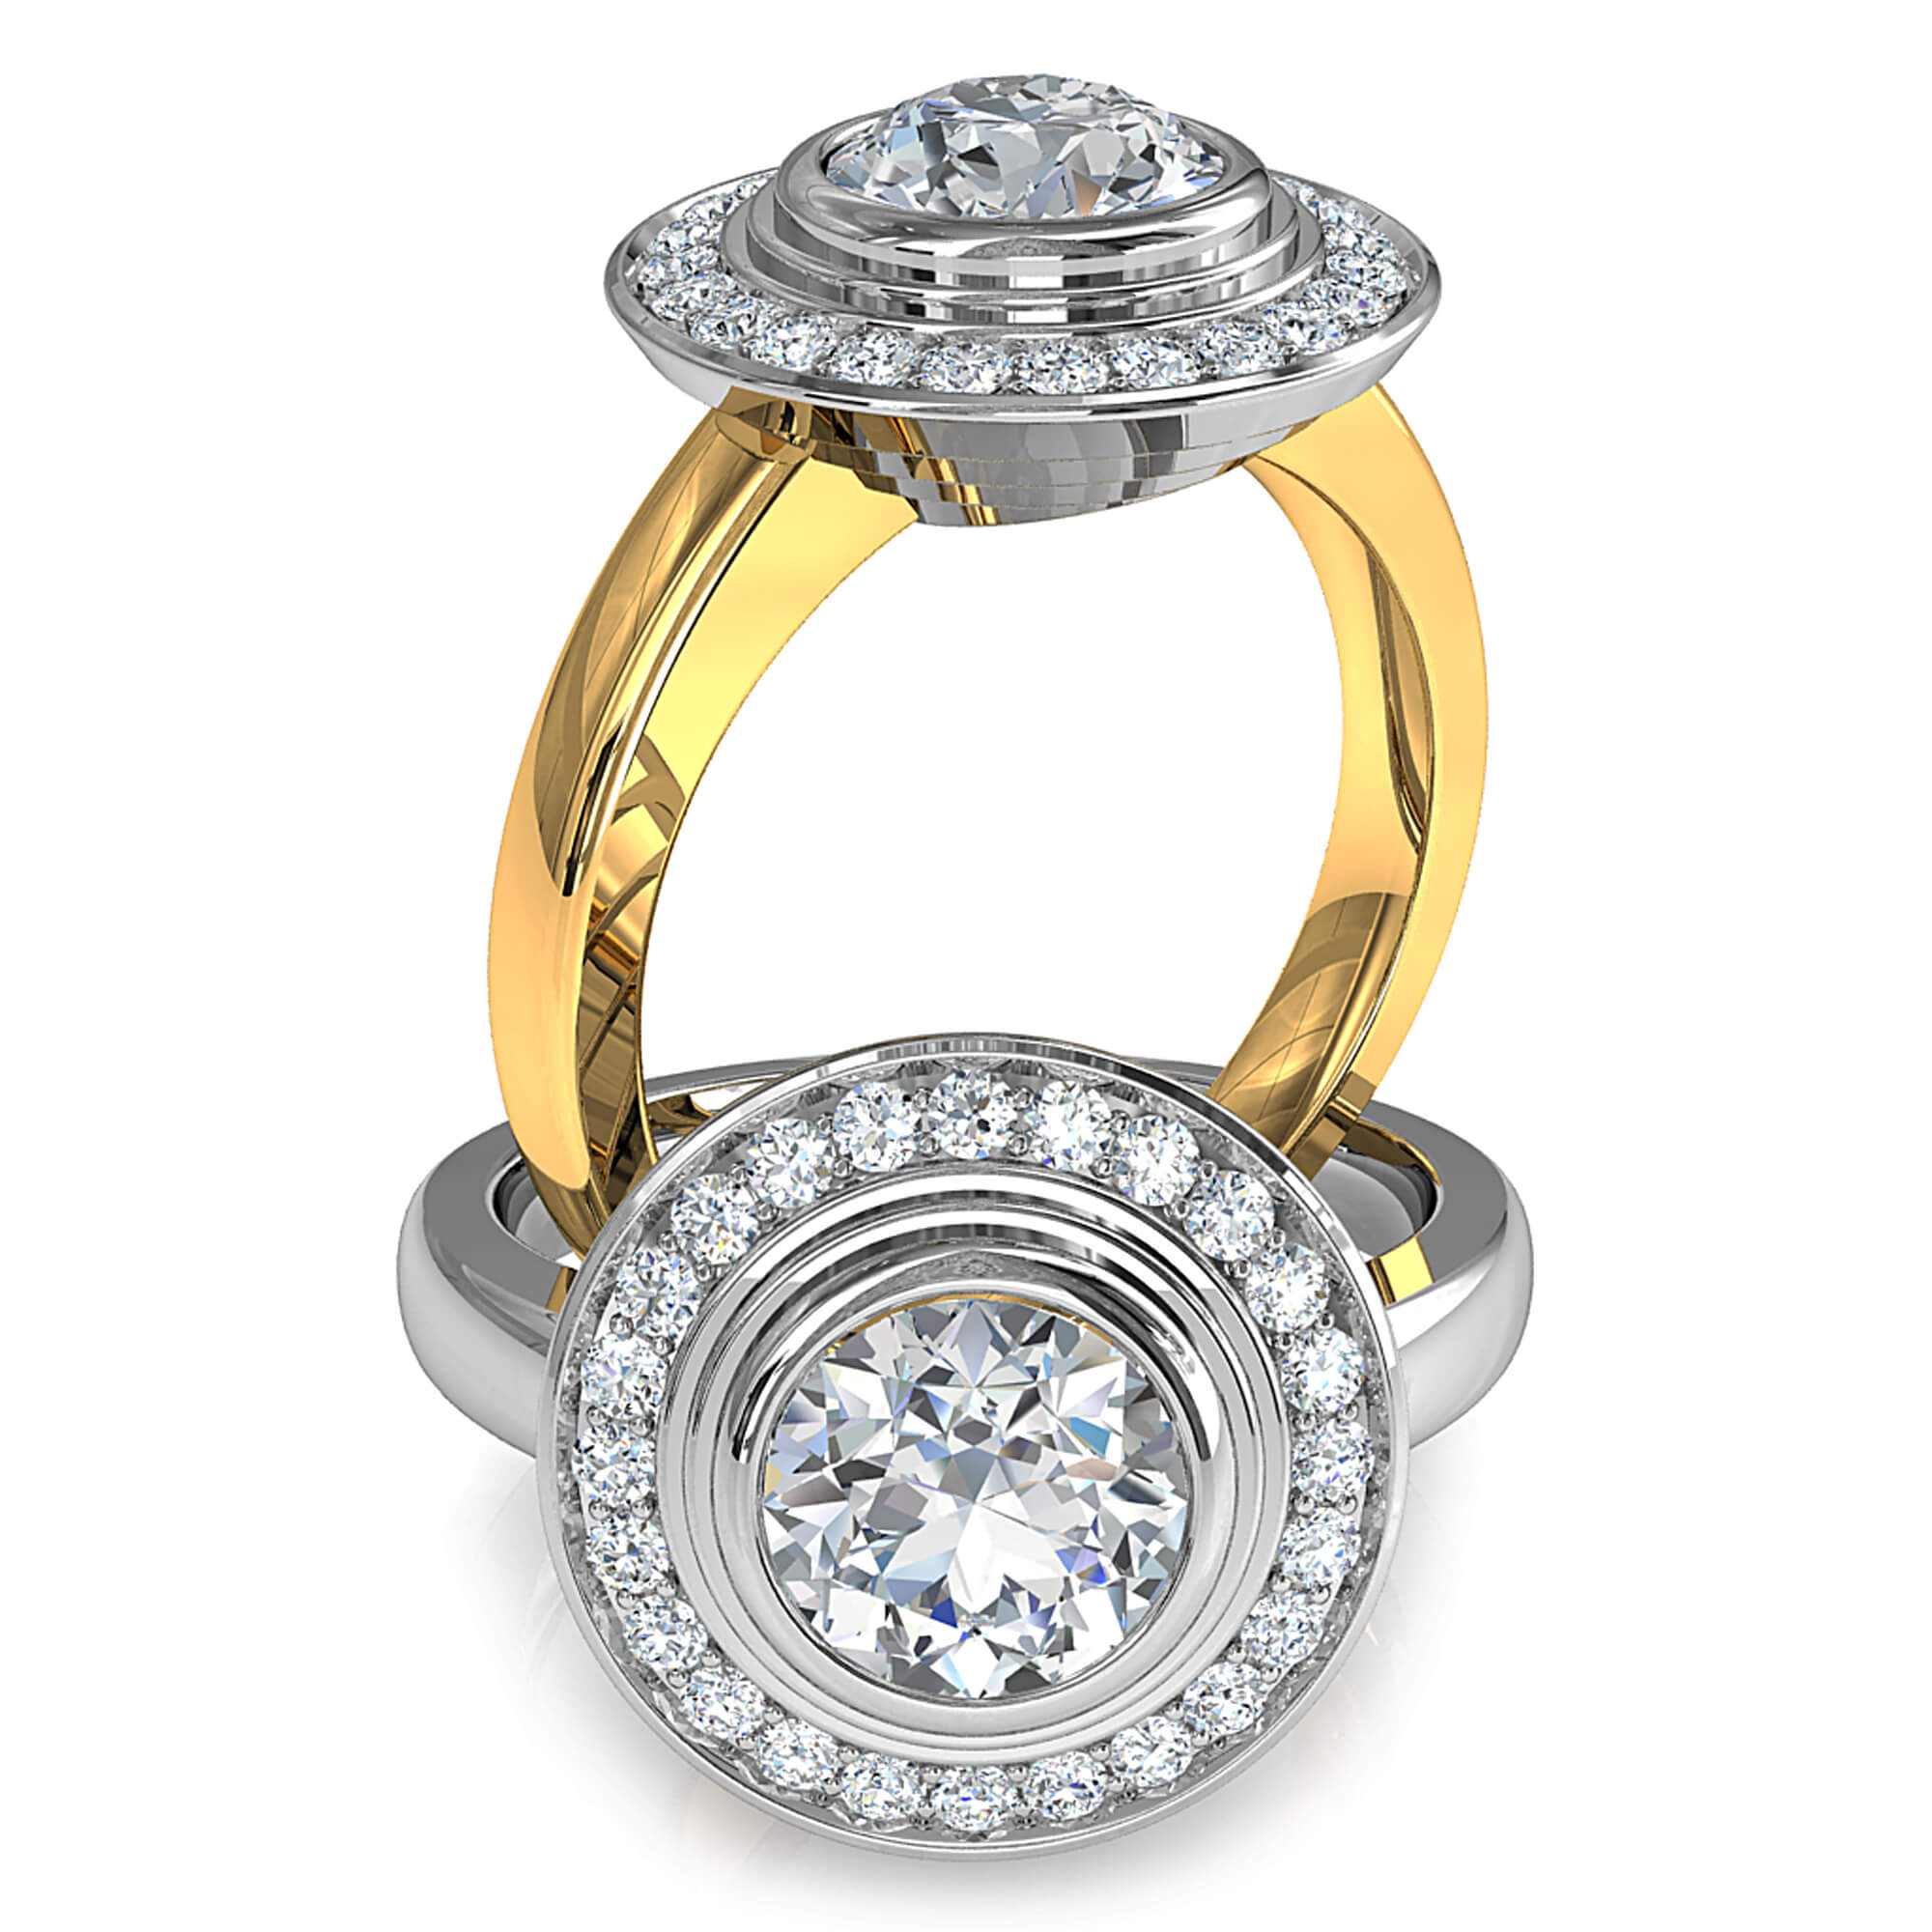 Round Brilliant Cut Diamond Halo Engagement Ring, Triple Bezel Set in a Bead Set Halo on a Plain Straight Band.